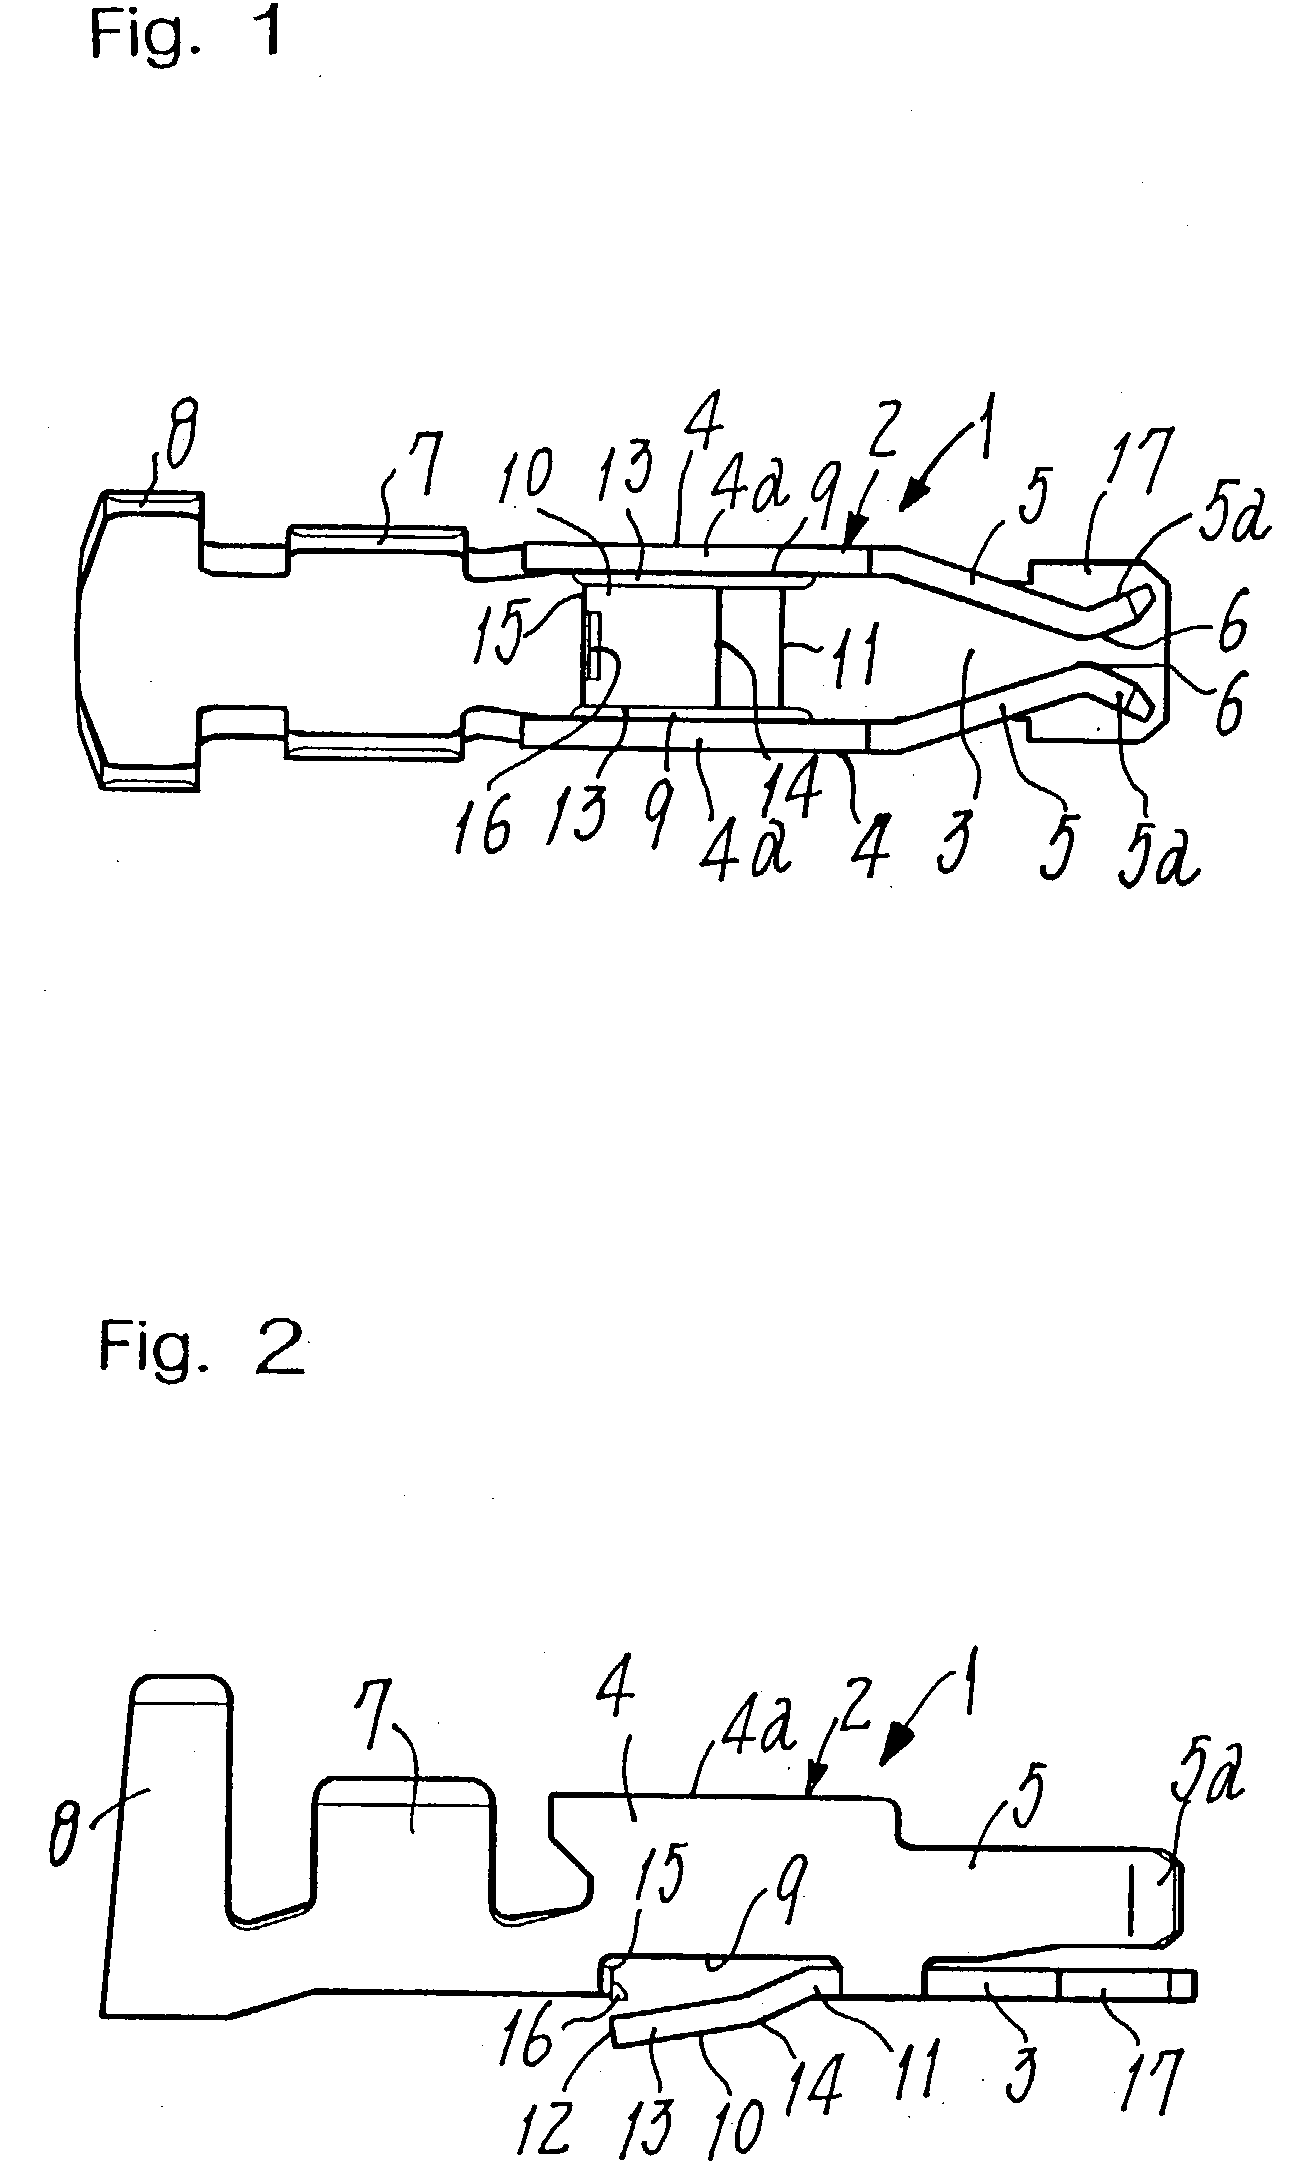 Socket contact and socket connector